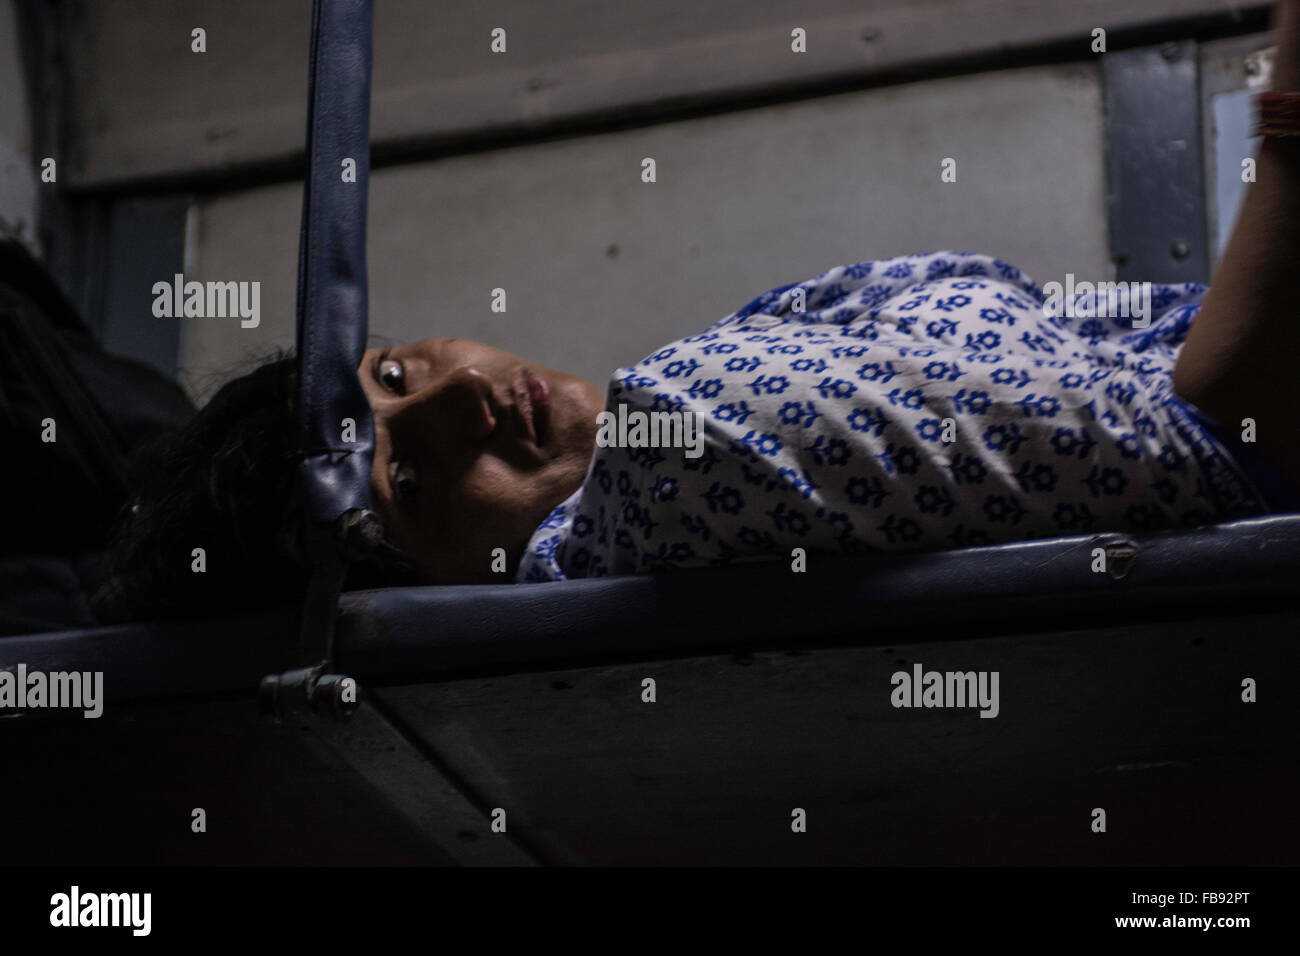 Sleeping and resting on the train. Indian Railways, India. Stock Photo